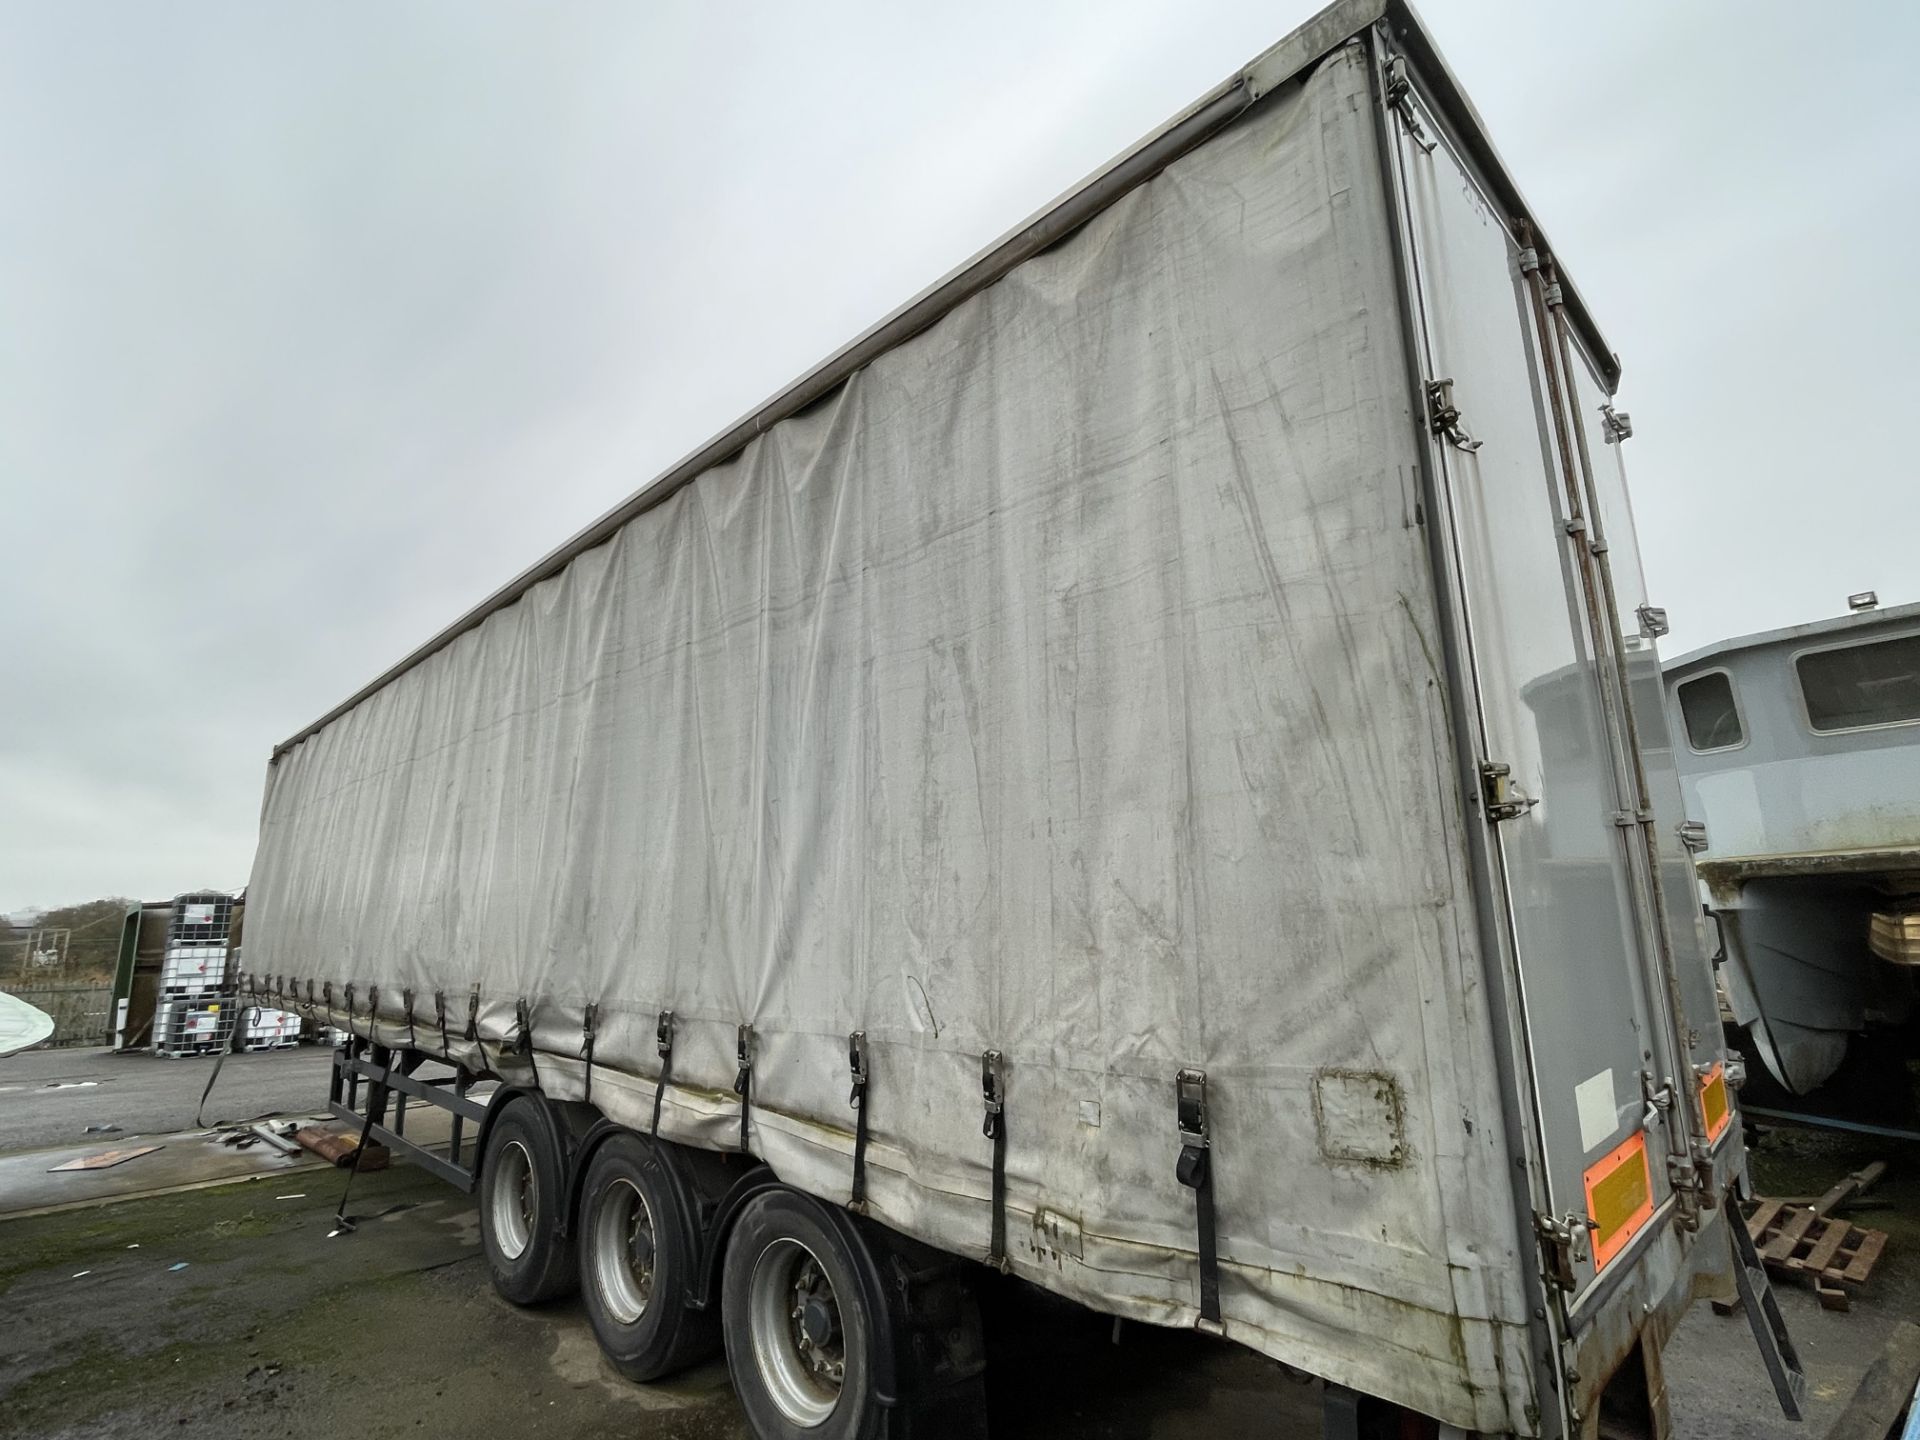 2005 SDC Trailers 45' Artic Curtainside Tri-Axle Trailer with Rear Barn Doors, Design Weight: 39, - Image 6 of 13